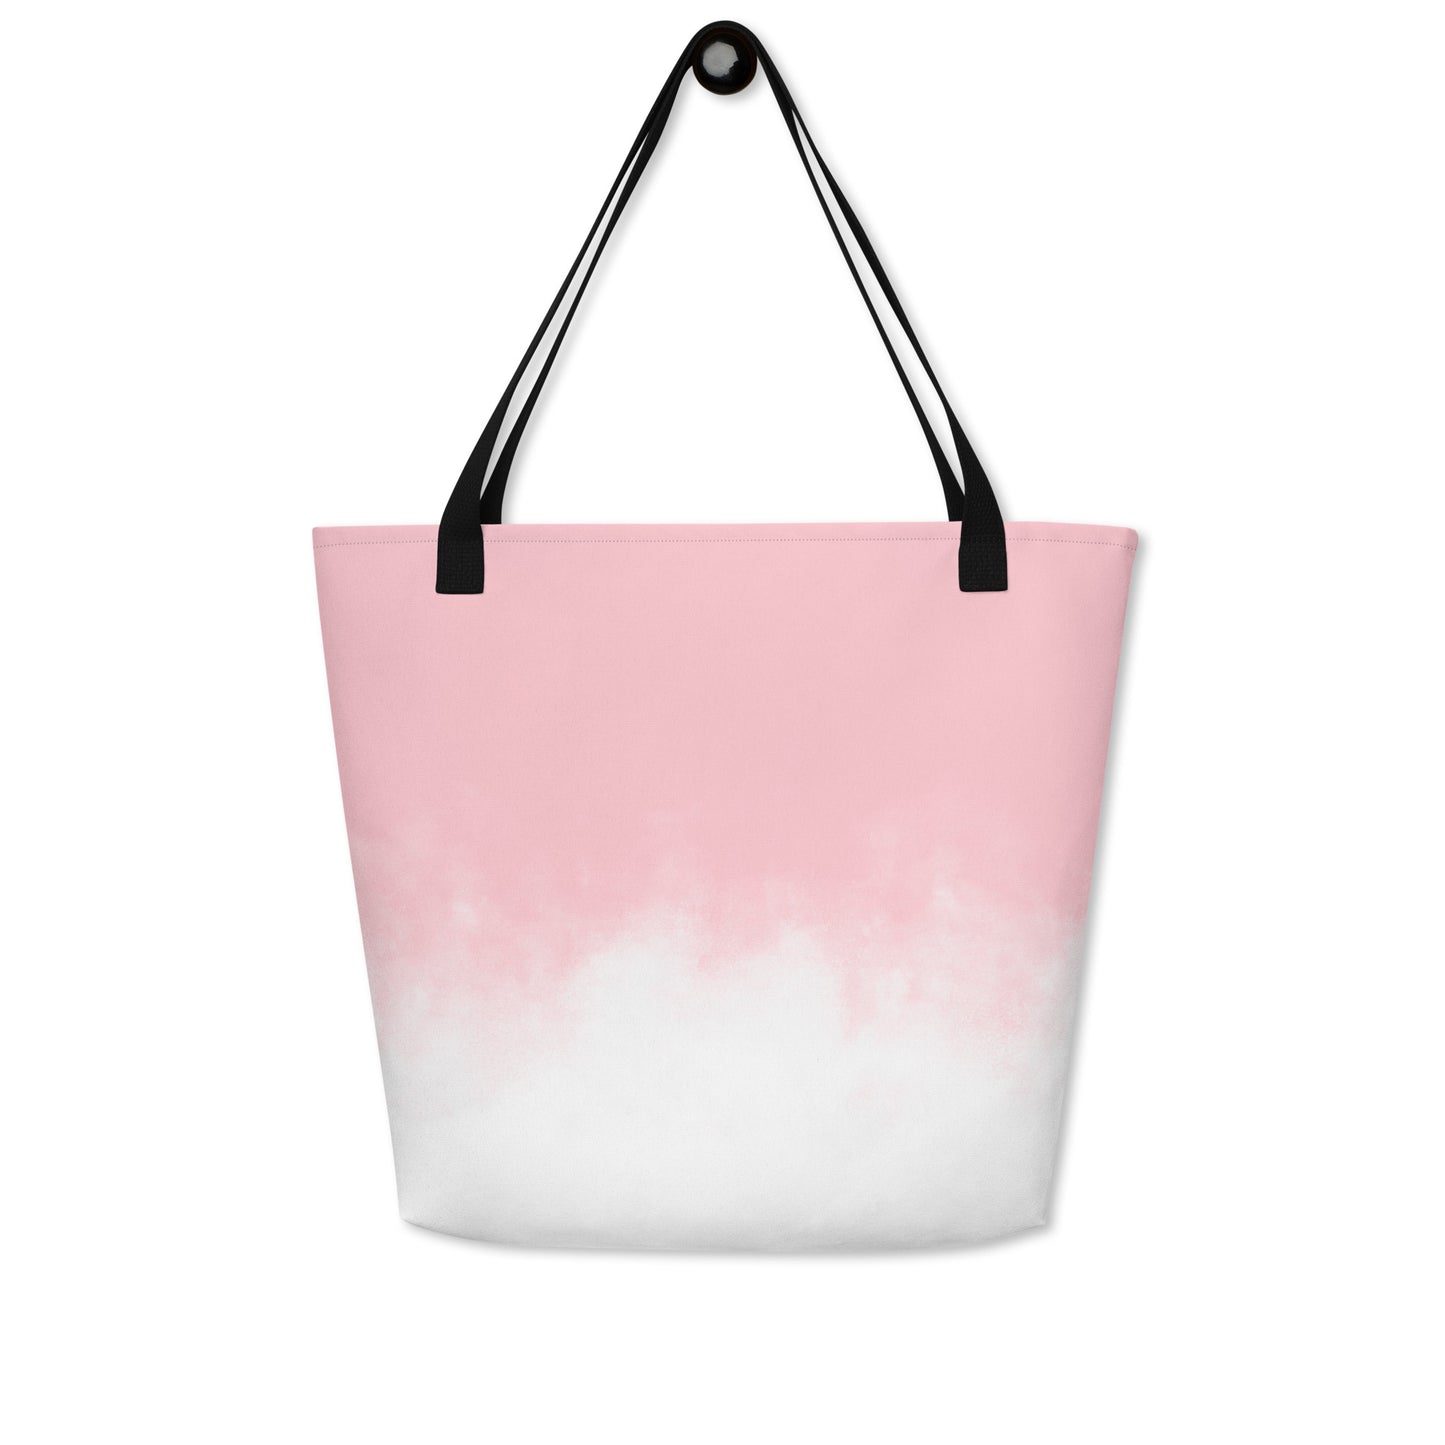 Sky is The Limit Tote